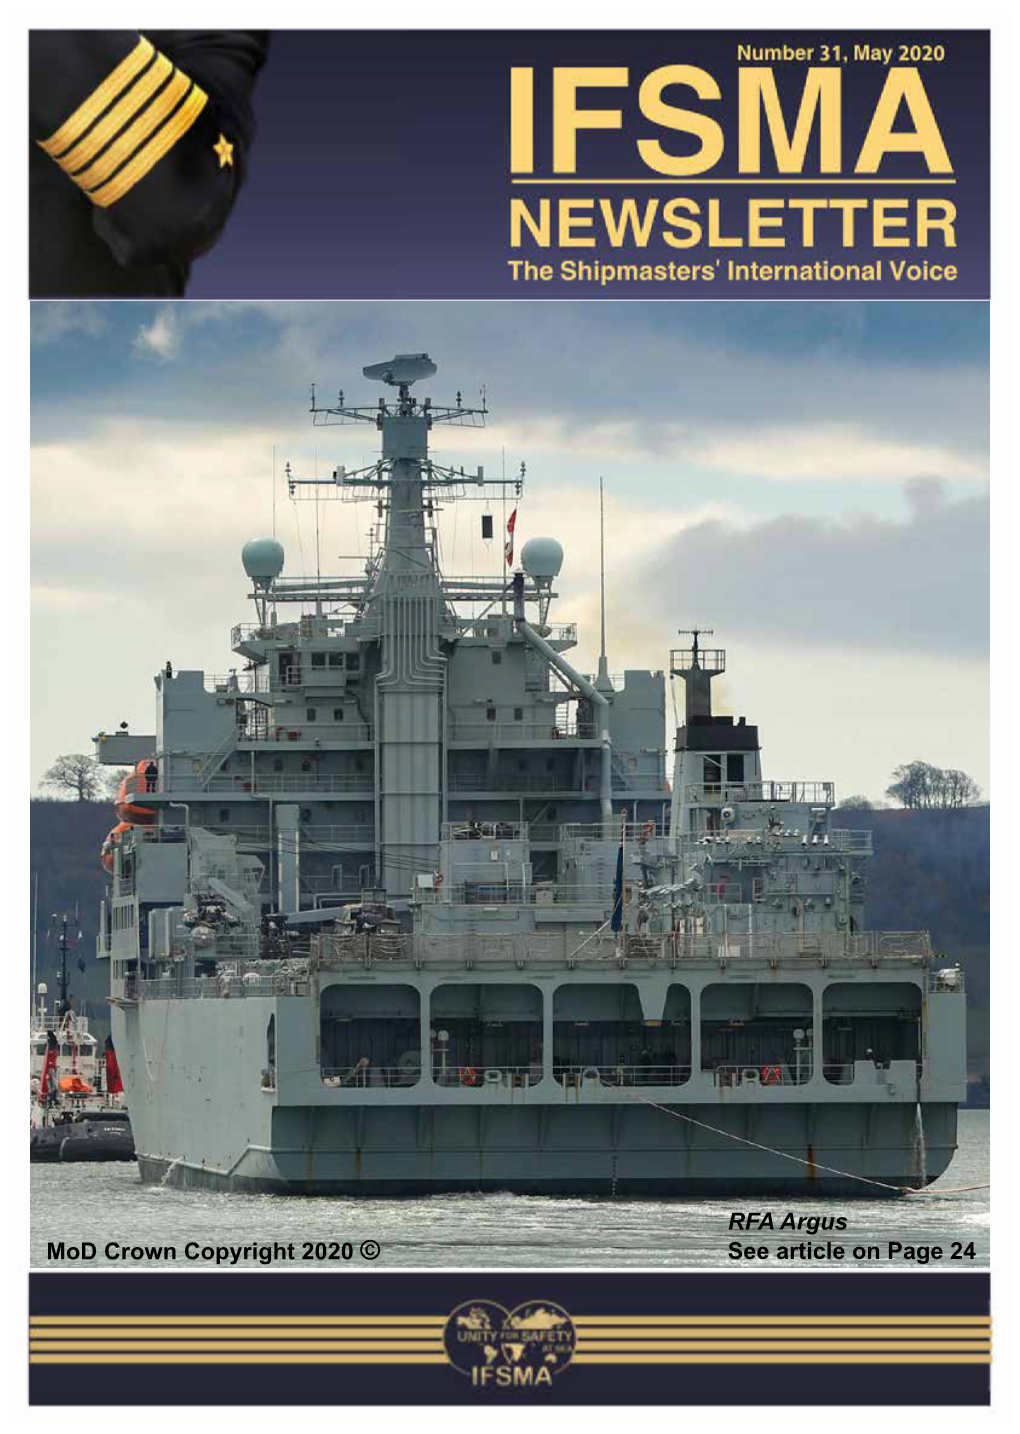 See Article on Page 24 RFA Argus Mod Crown Copyright 2020